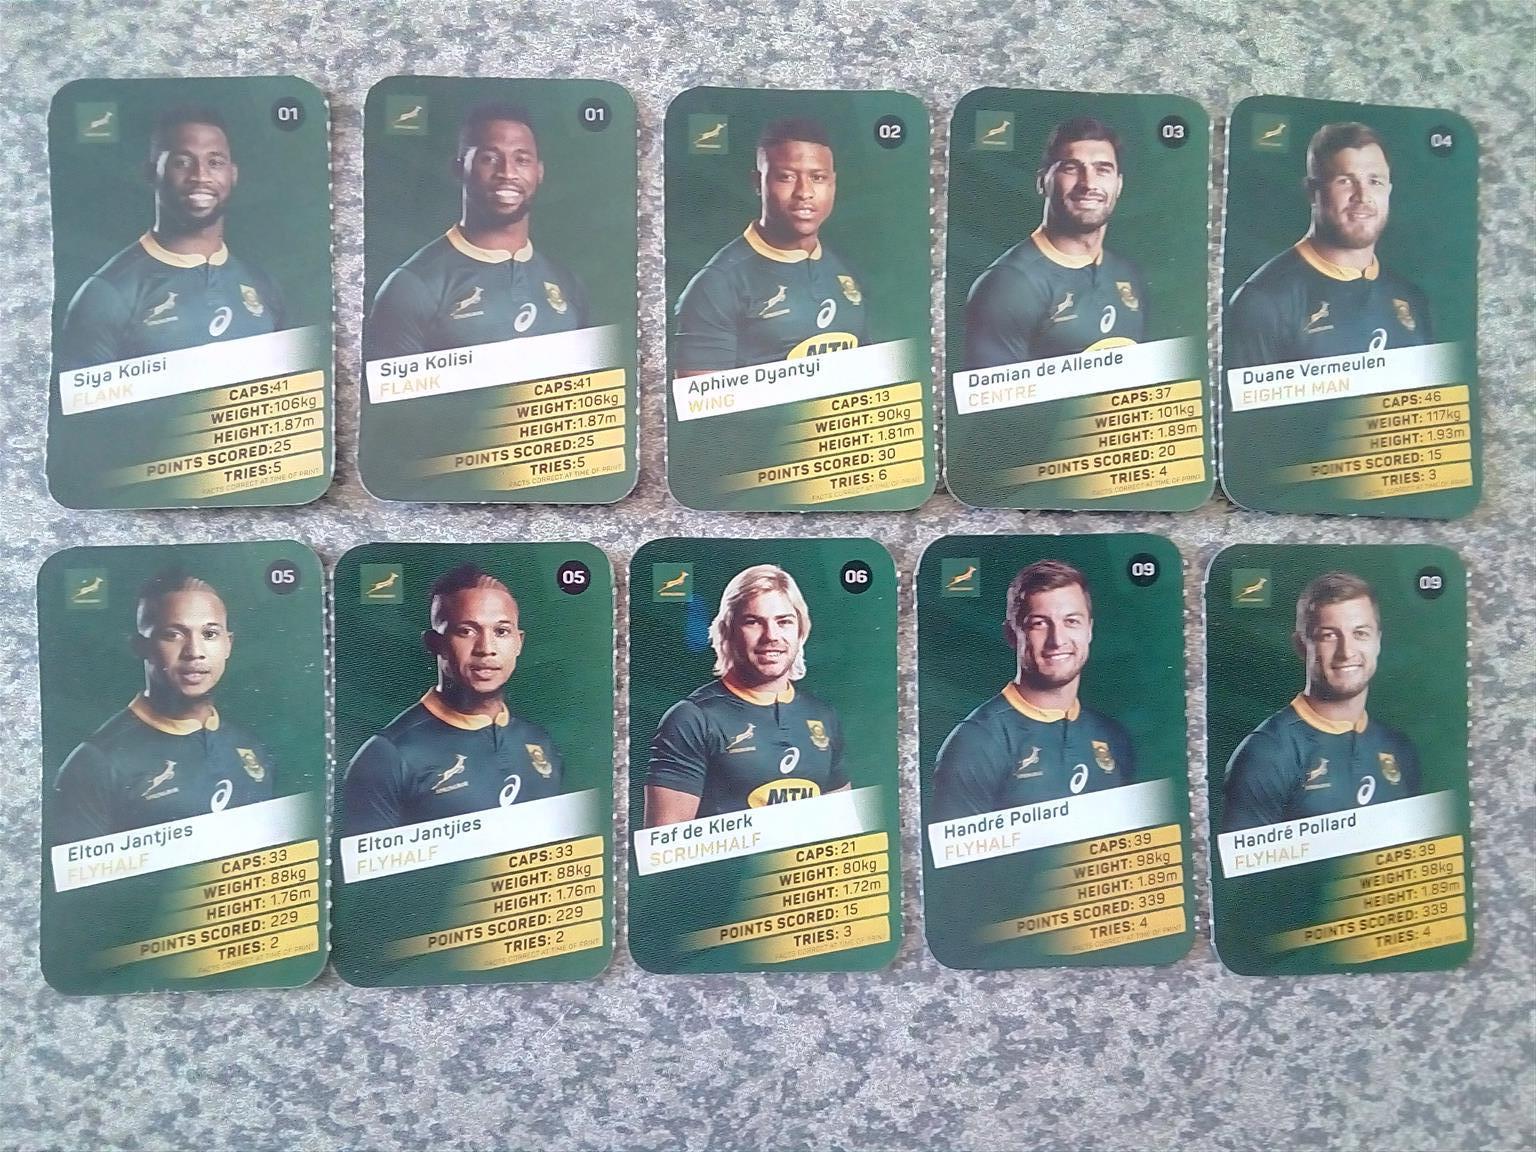 PICK 'N PAY SUPER CARDS: SPRINGBOKS MEN'S AND WOMEN'S RUGBY TEAMS